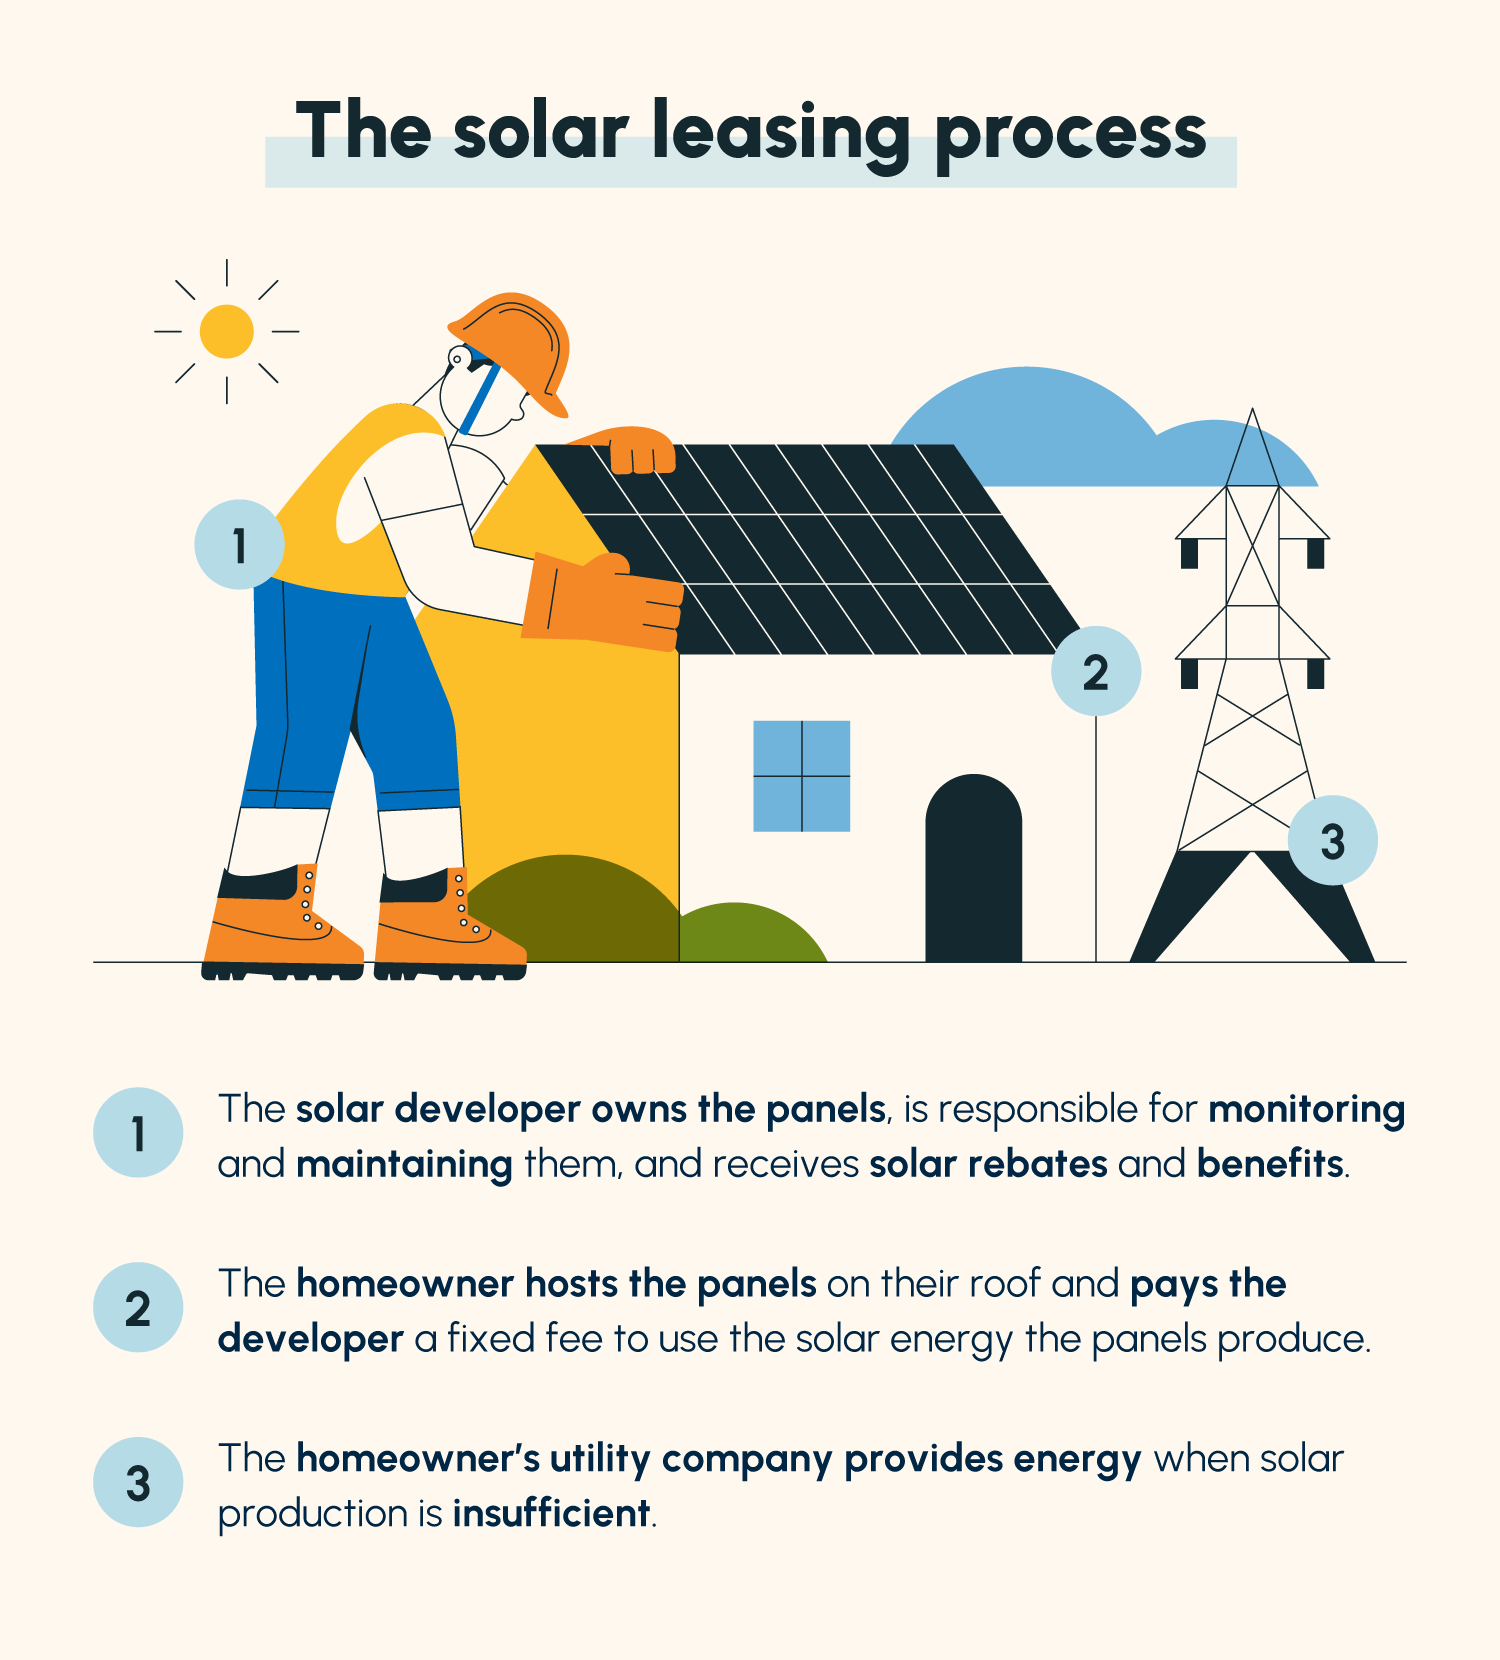 An illustrated solar installer, home, and utility grid demonstrating how solar leasing works